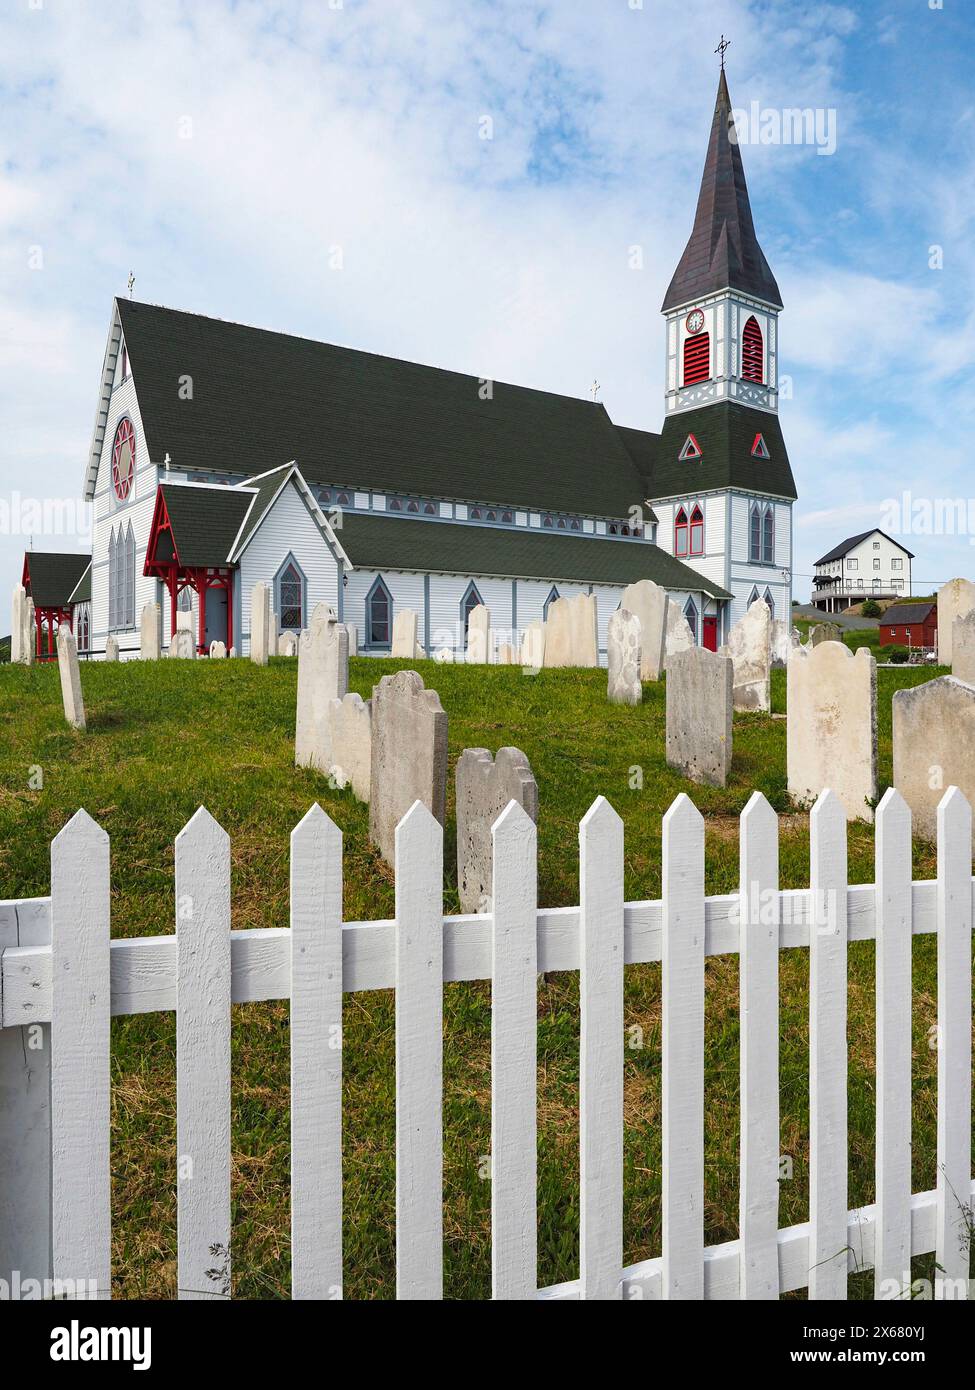 Canada, cemetery, completed 1894, fishing community, Gothic Revival architecture, Heritage Foundation of Newfoundland and Labrador designated St. Paul's Anglican Church a Registered Heritage Structure, historic, Newfoundland, North America, Protestant religion, religious site, St. Paul's Anglican Church, town of Trinity, Trinity Bight, wood Stock Photo